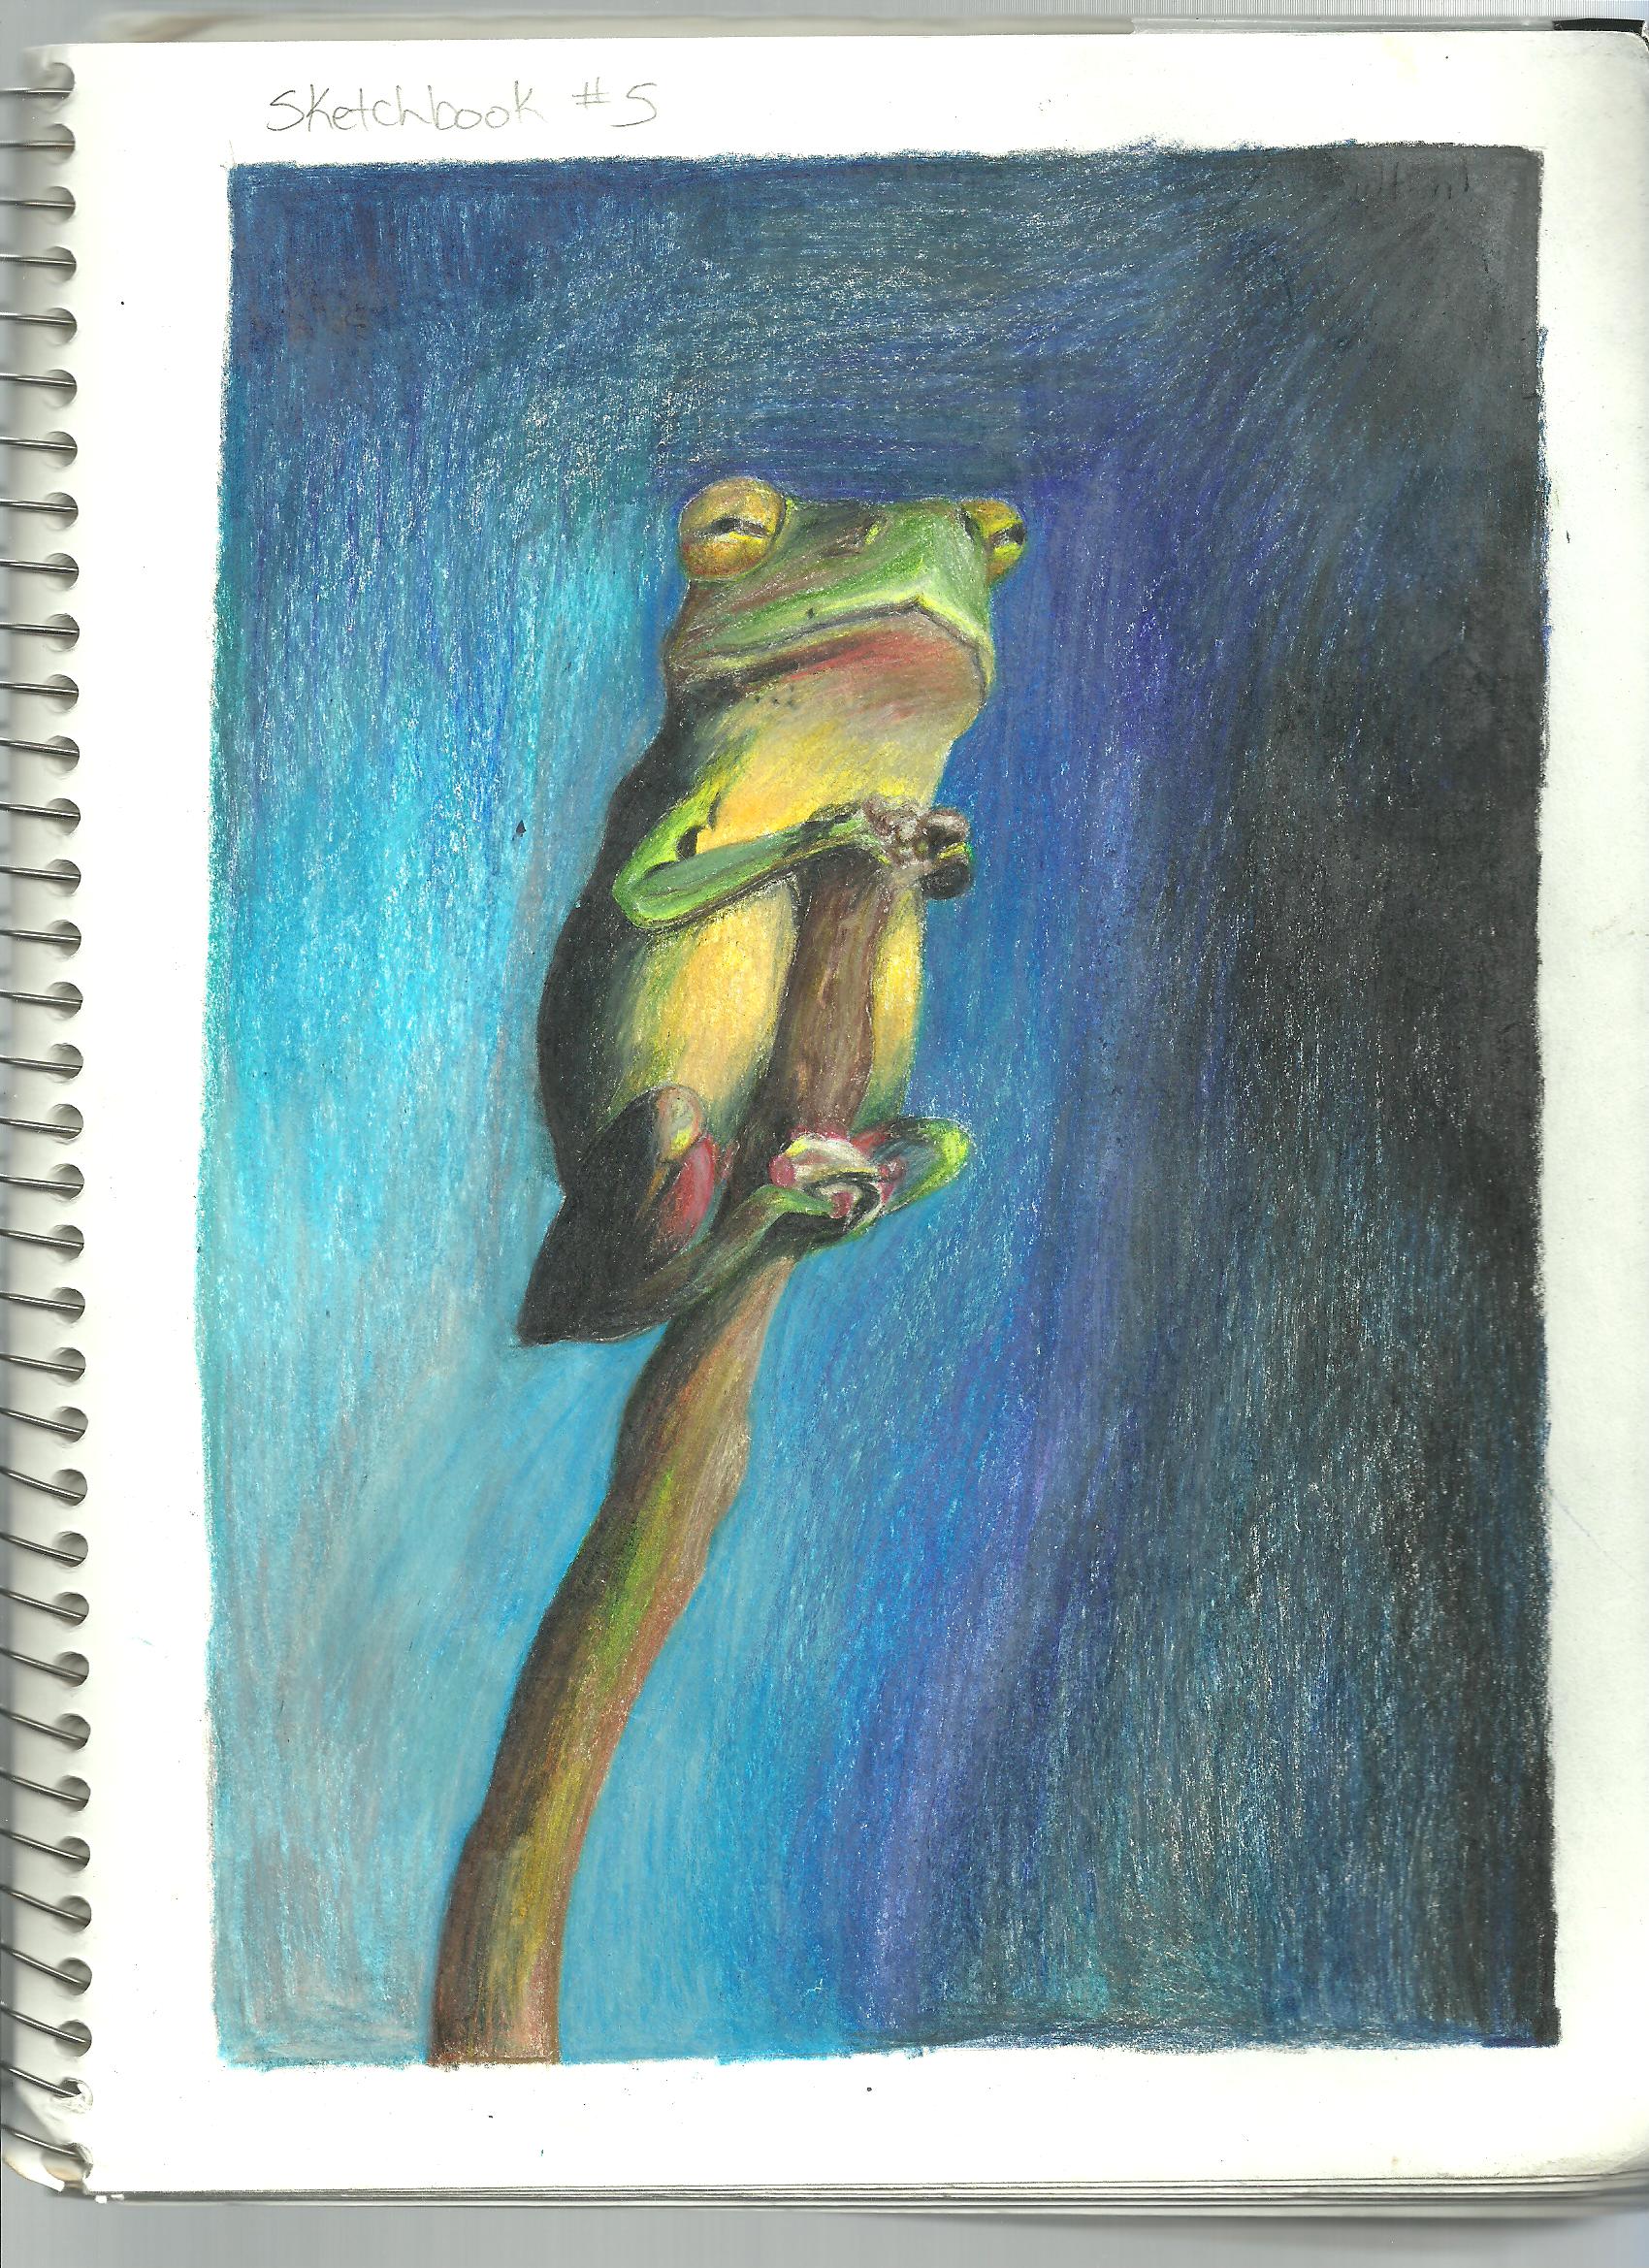 Frog on a stick